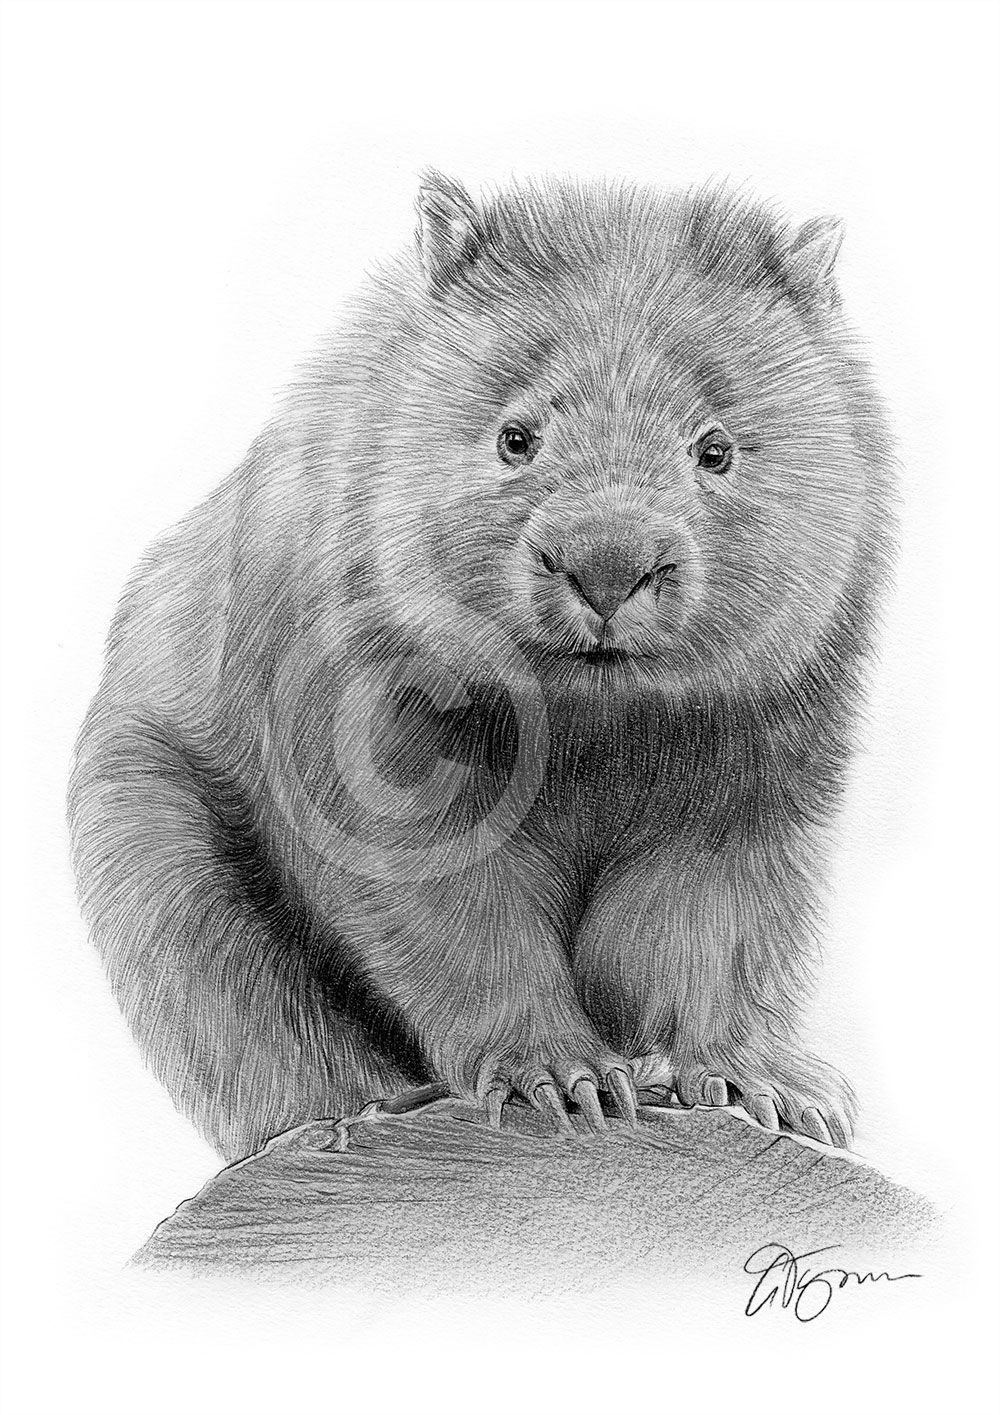 Pencil drawing of a wombat by artist Gary Tymon